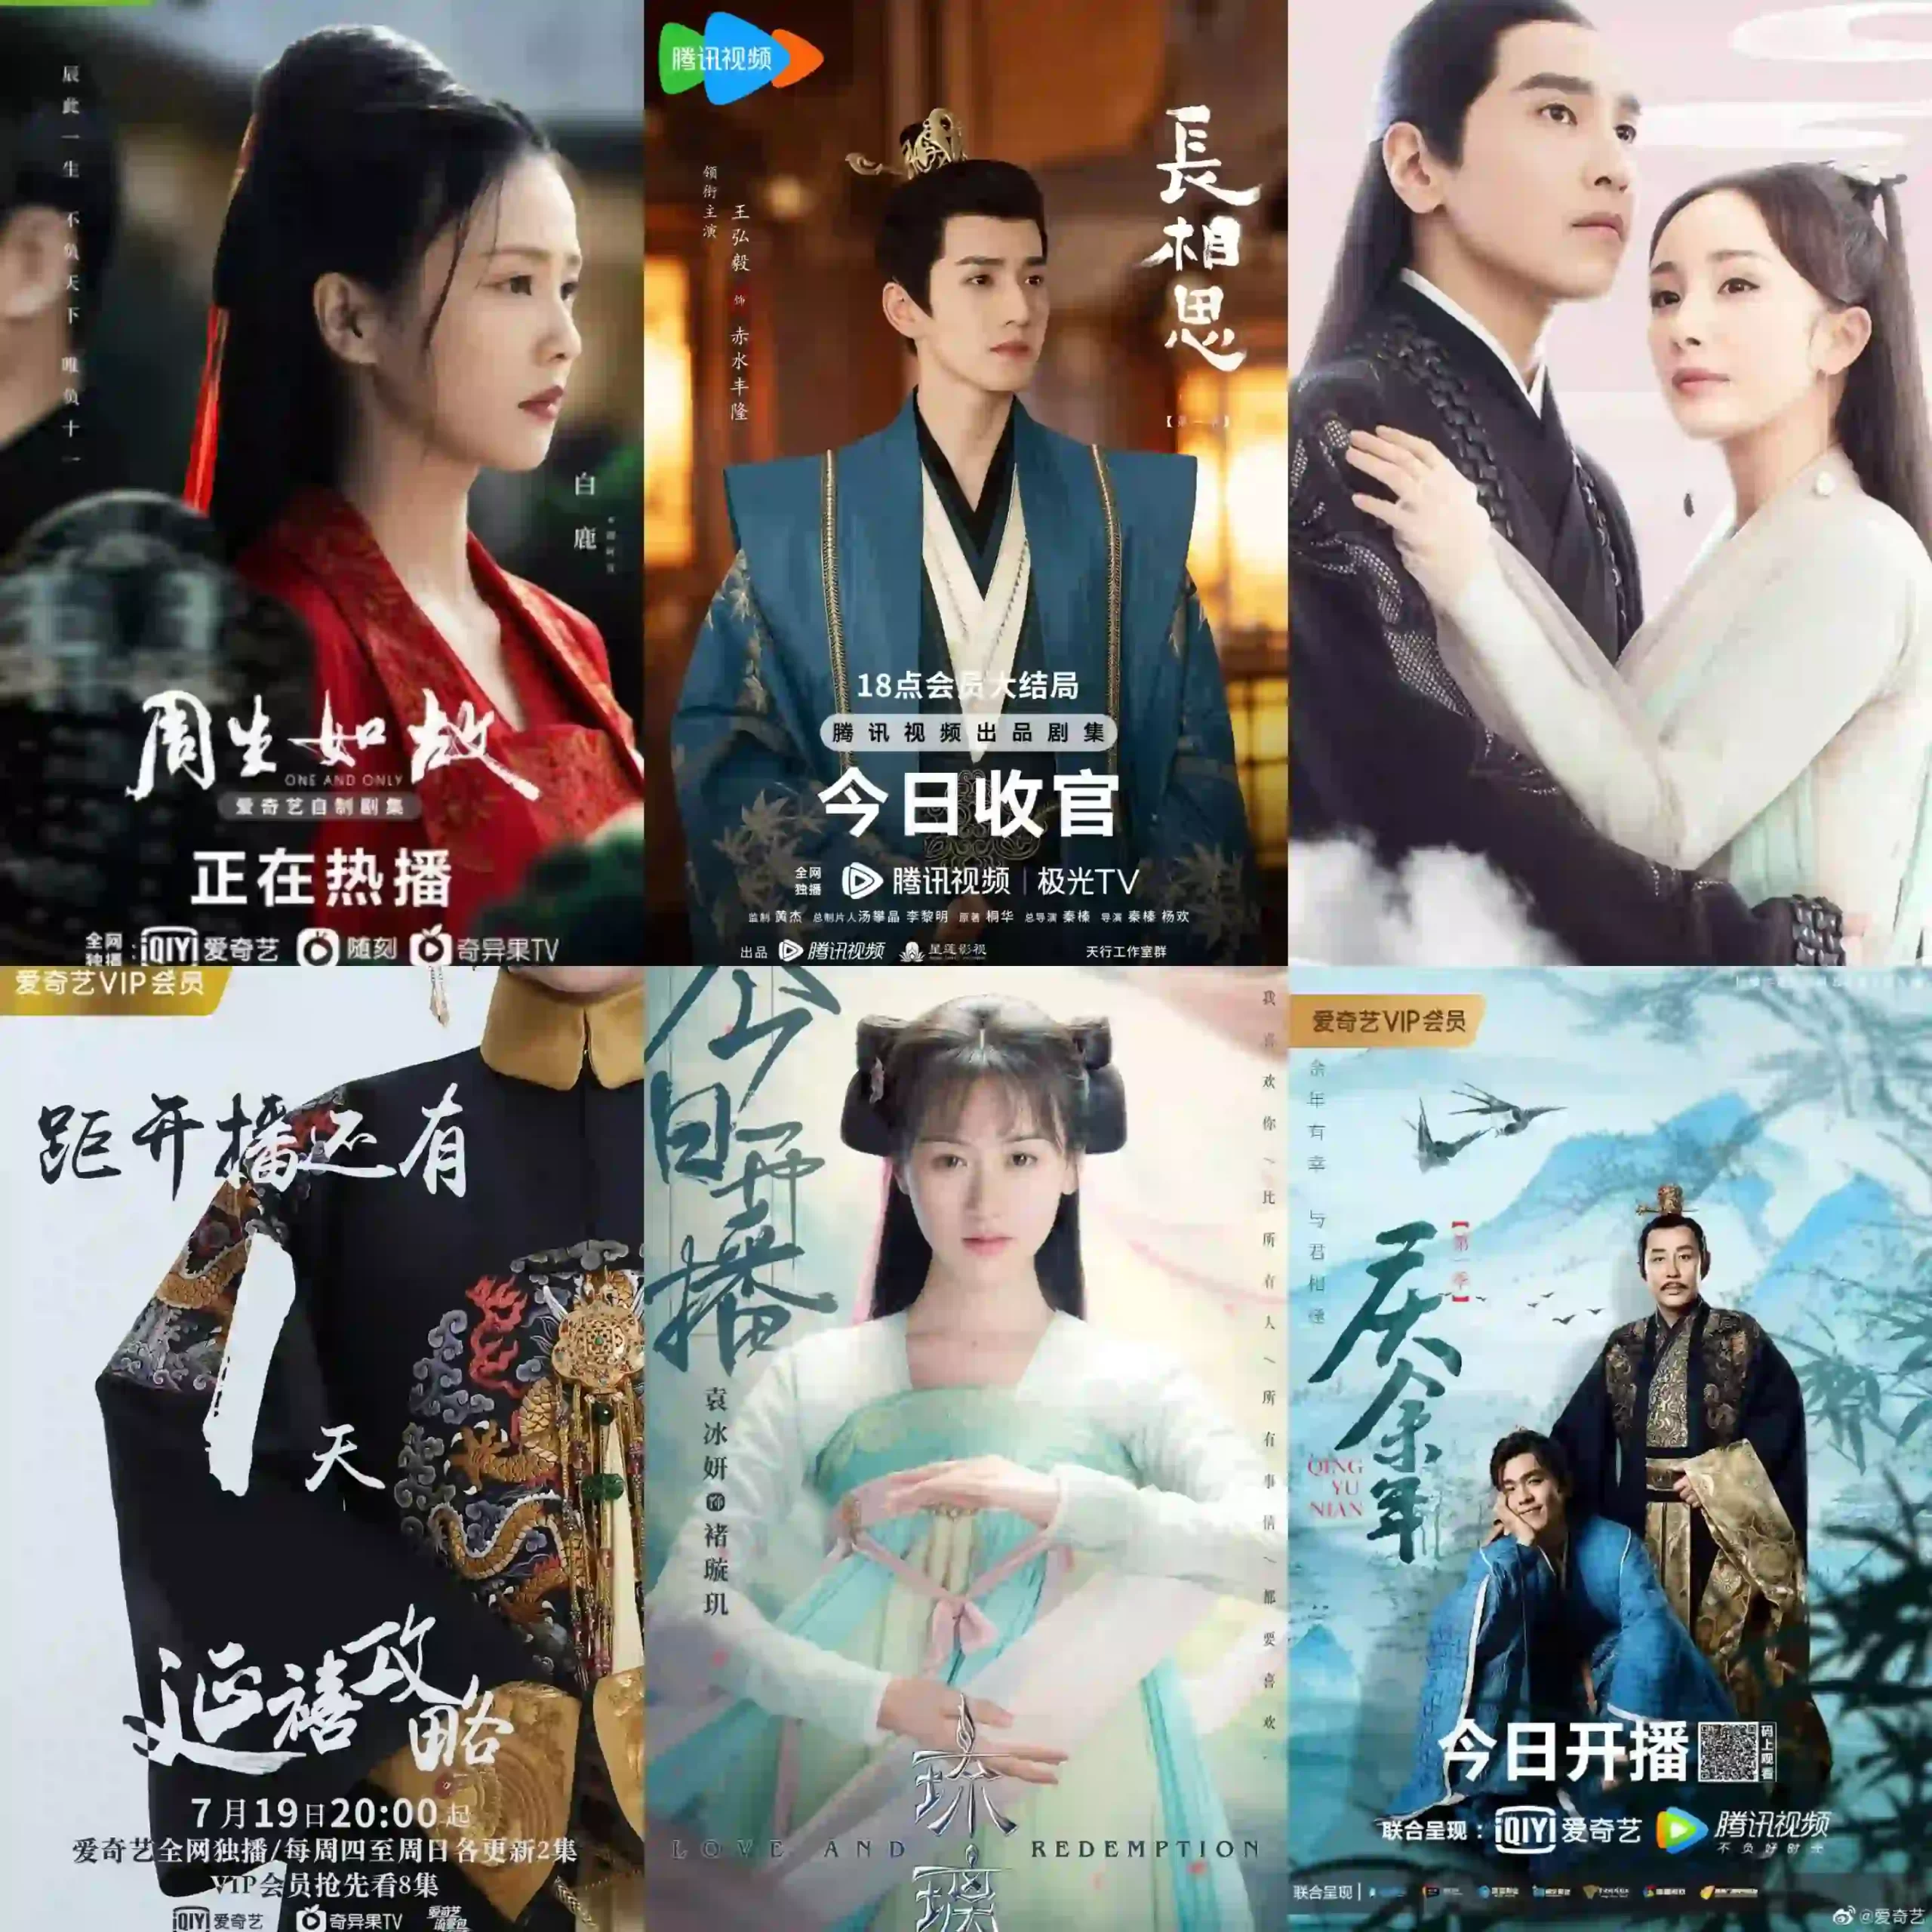 Top rated romantic Chinese dramas to watch right now